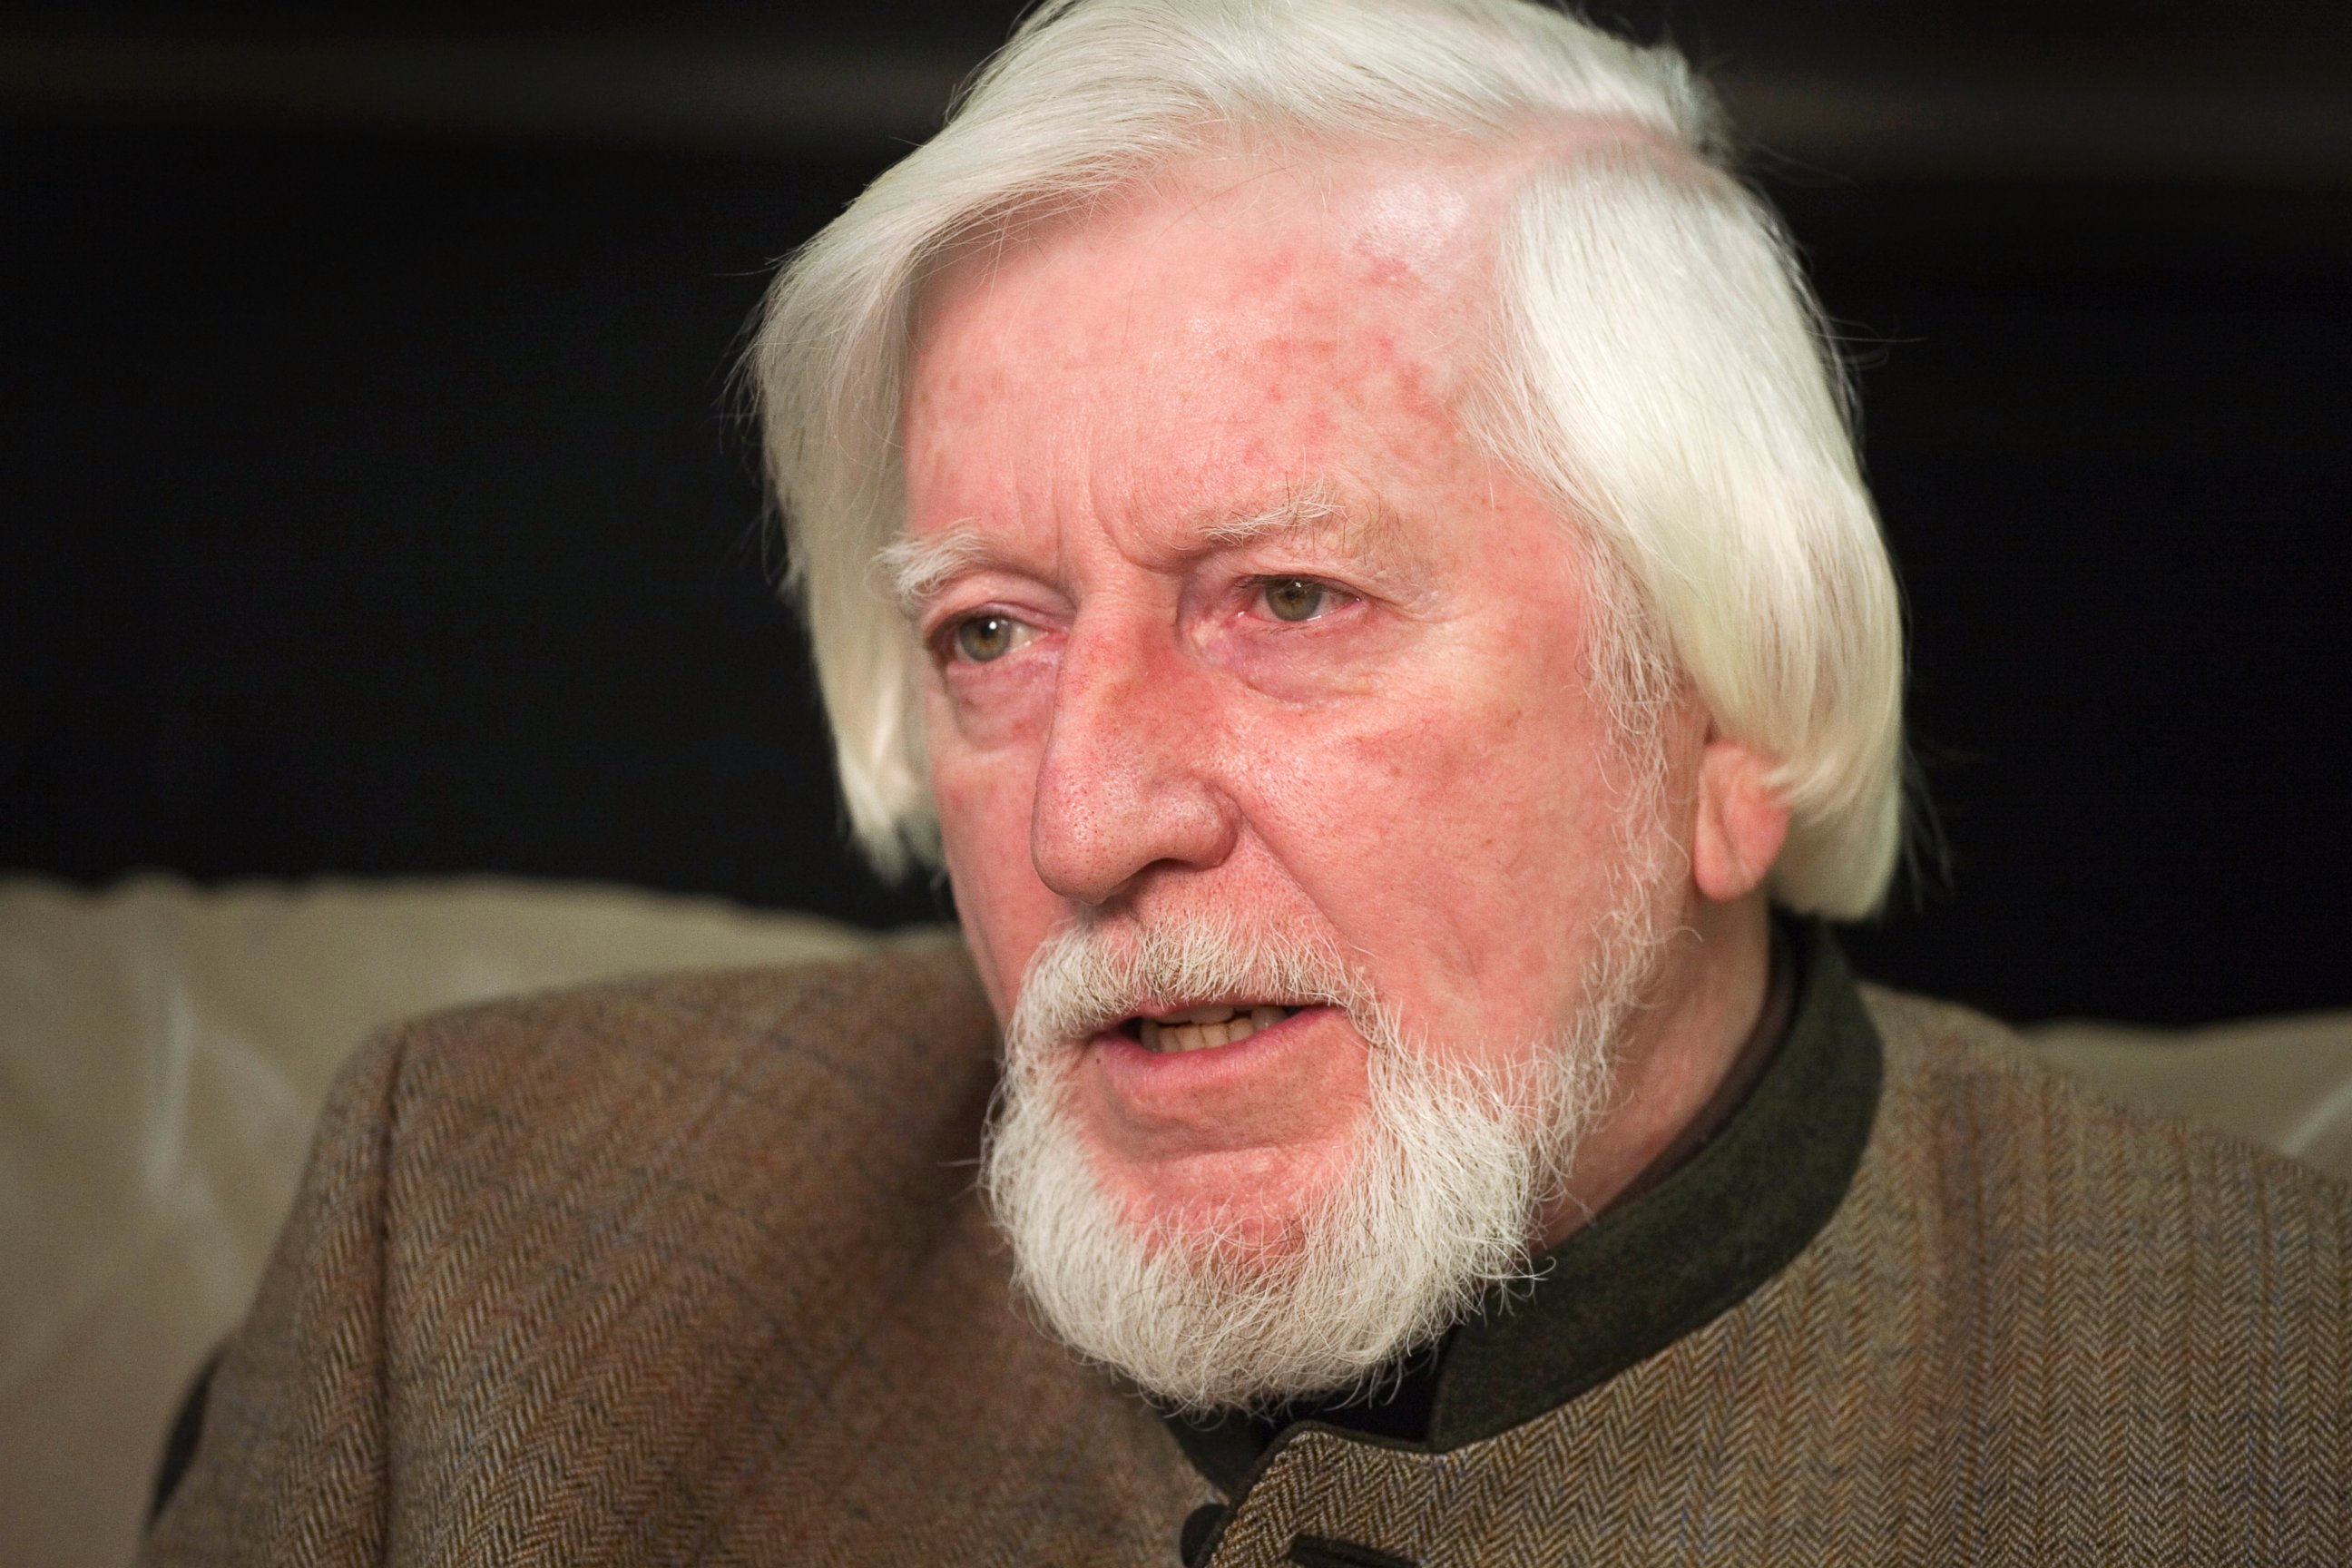 PHOTO: Caroll Spinney, who voices Big Bird and Oscar the Grouch, is interviewed during a break from taping an episode of Sesame Street in New York, April 10, 2008.